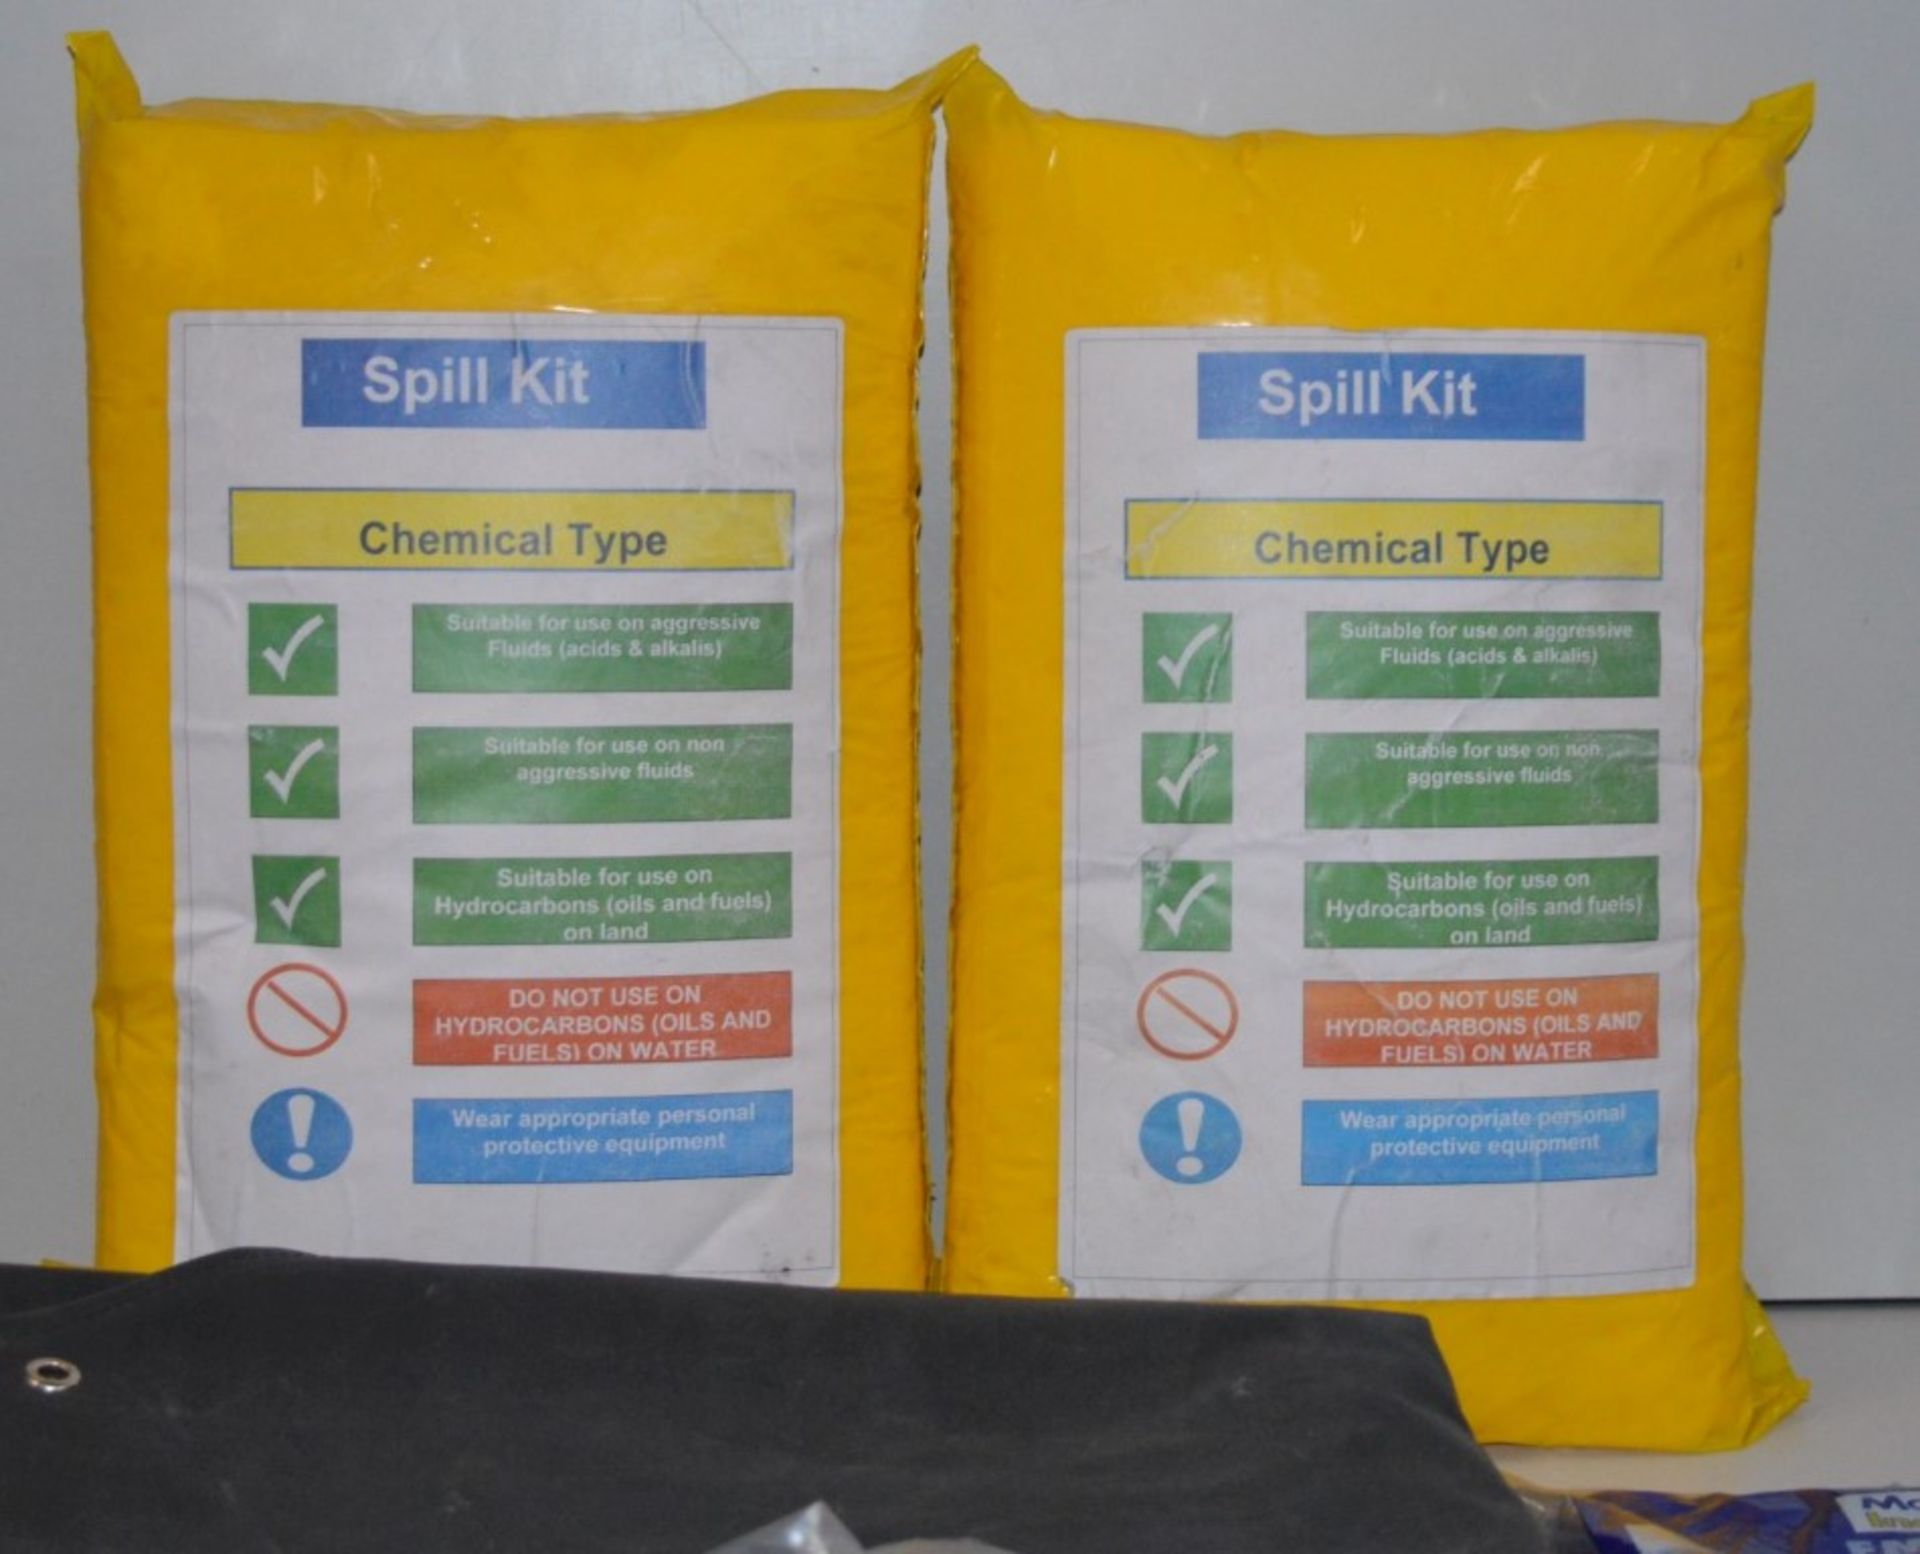 1 x Assorted Collection of Spill Kit Consumables - Includes 2 x Chemical Spill Kits, 1 x Emeror - Image 8 of 16